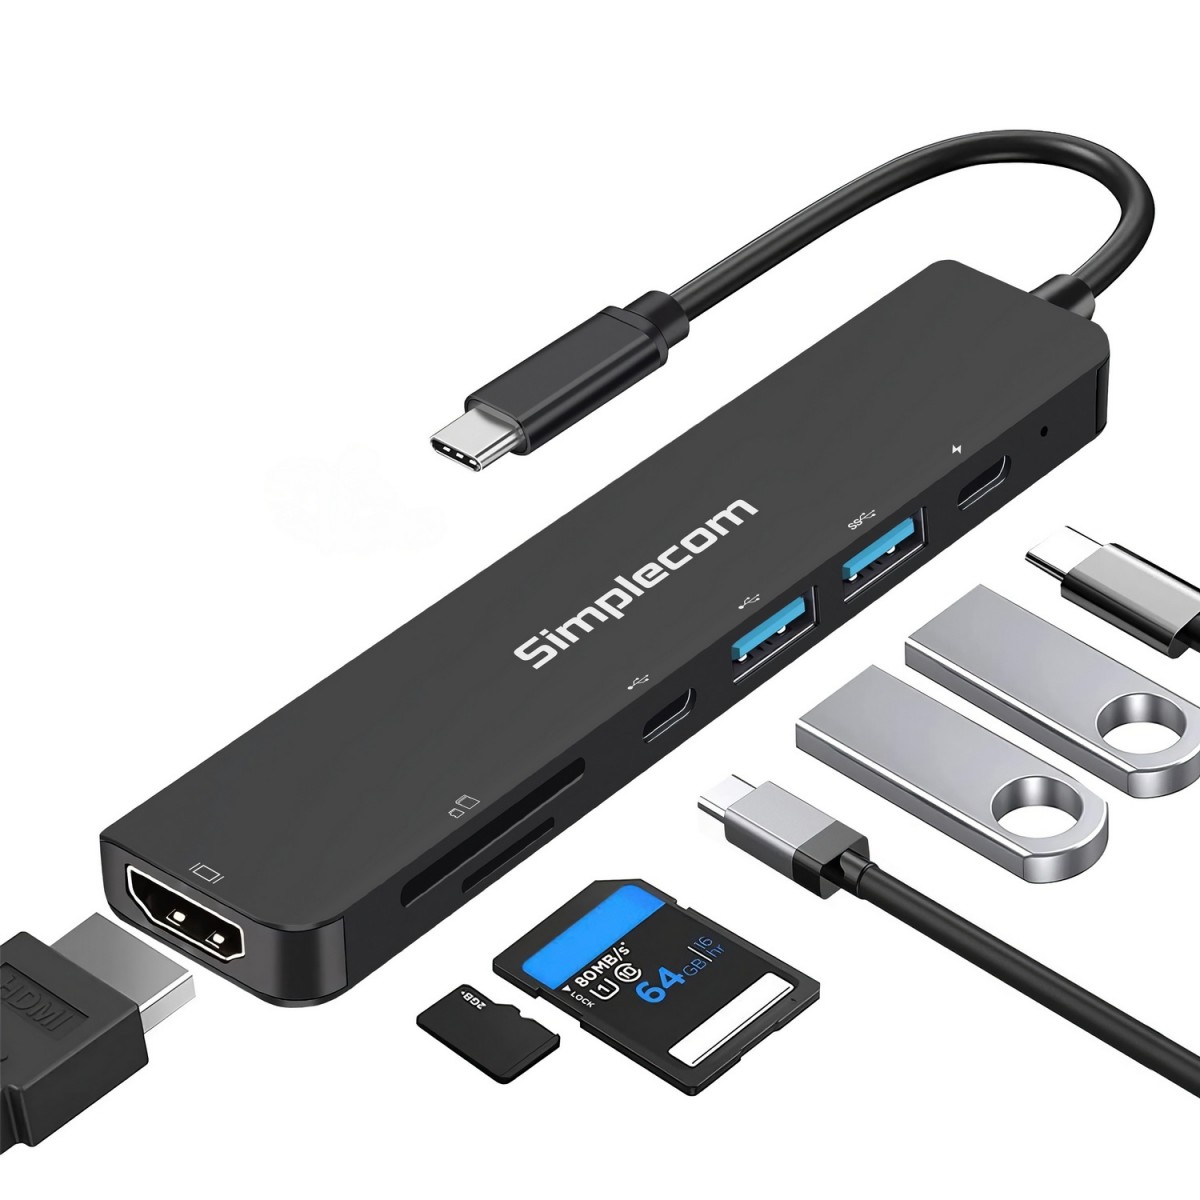 SSK USB C to Dual HDMI Adapter 4K/60Hz,4 in 1 Laptop HDMI Splitter for  Multi Monitors Hub with 2 HDMI 4K,100W PD,USB 2.0 Port for MacBook  Pro,Air,Lenovo,Dell,HP 